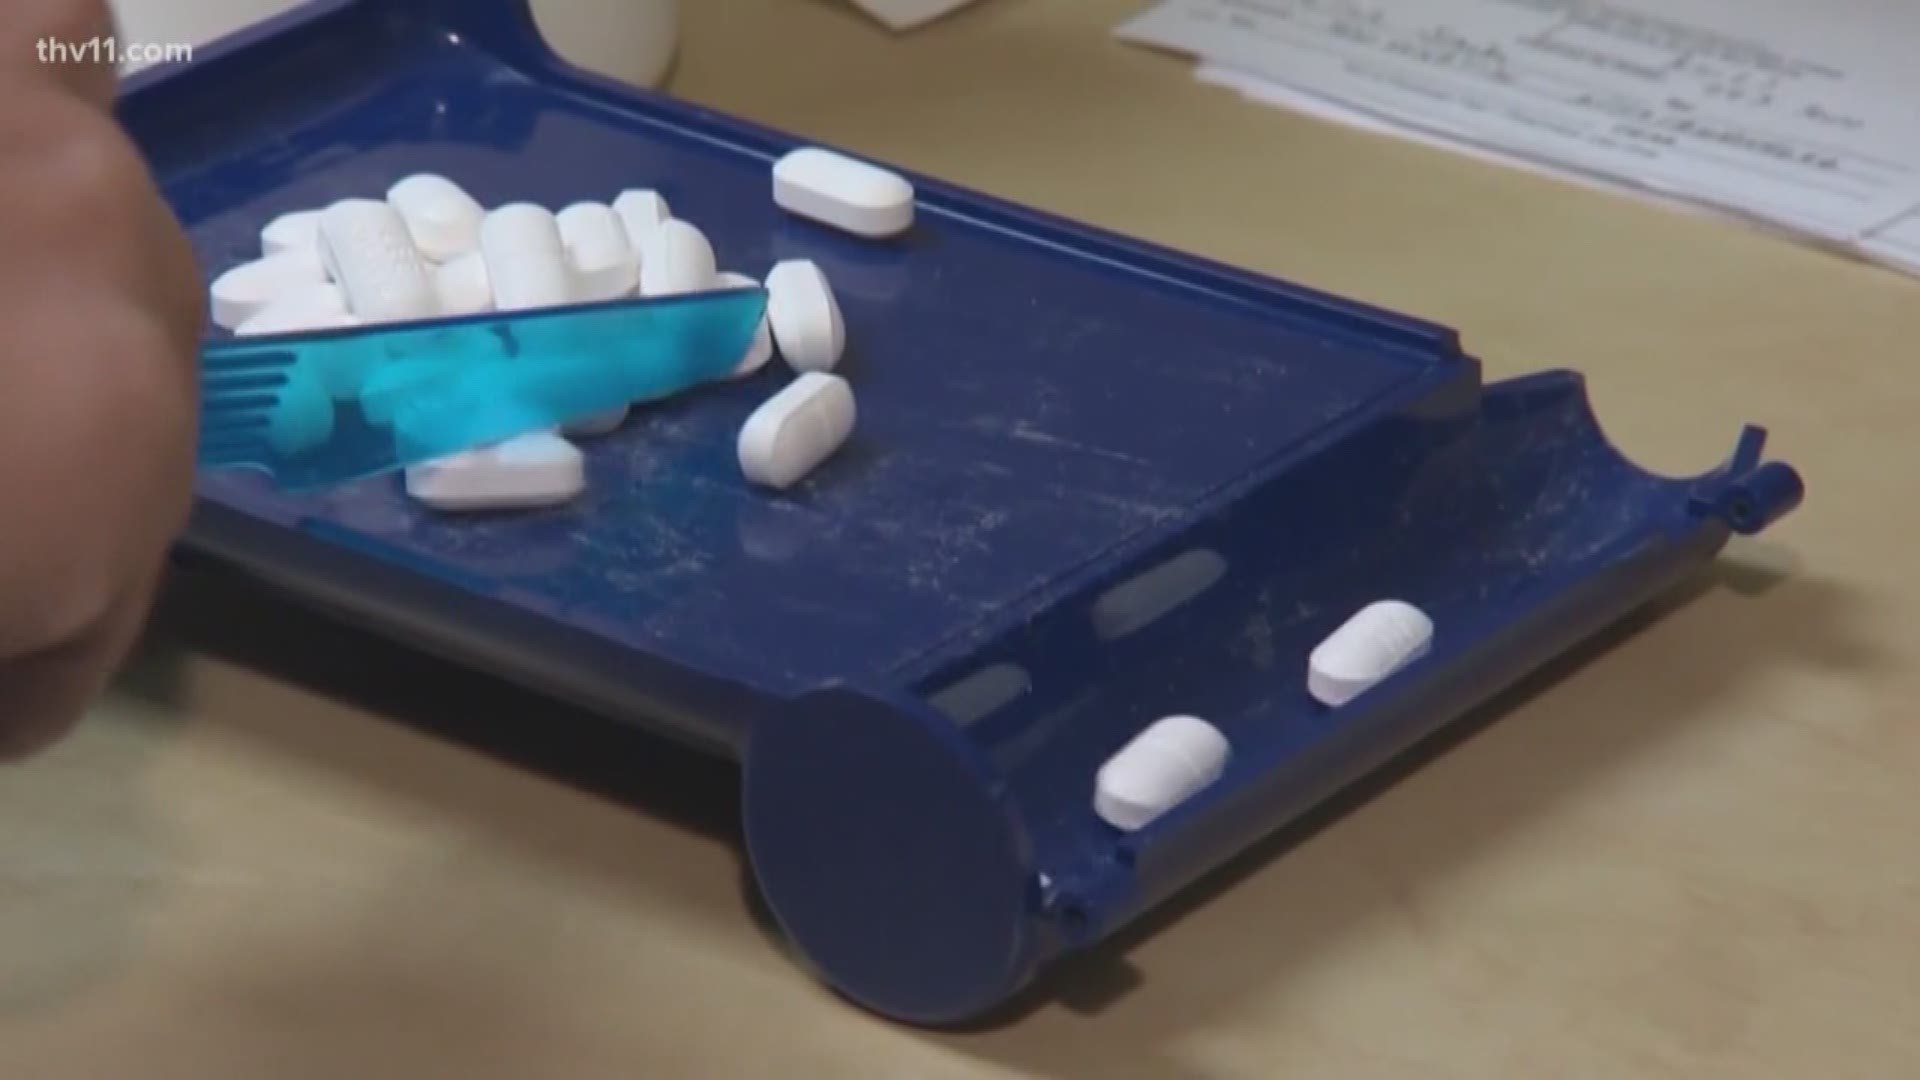 New numbers are out on the battle of the opioid crisis. Statistics show Arkansas is still one of the worst states for opioid abuse in the country.